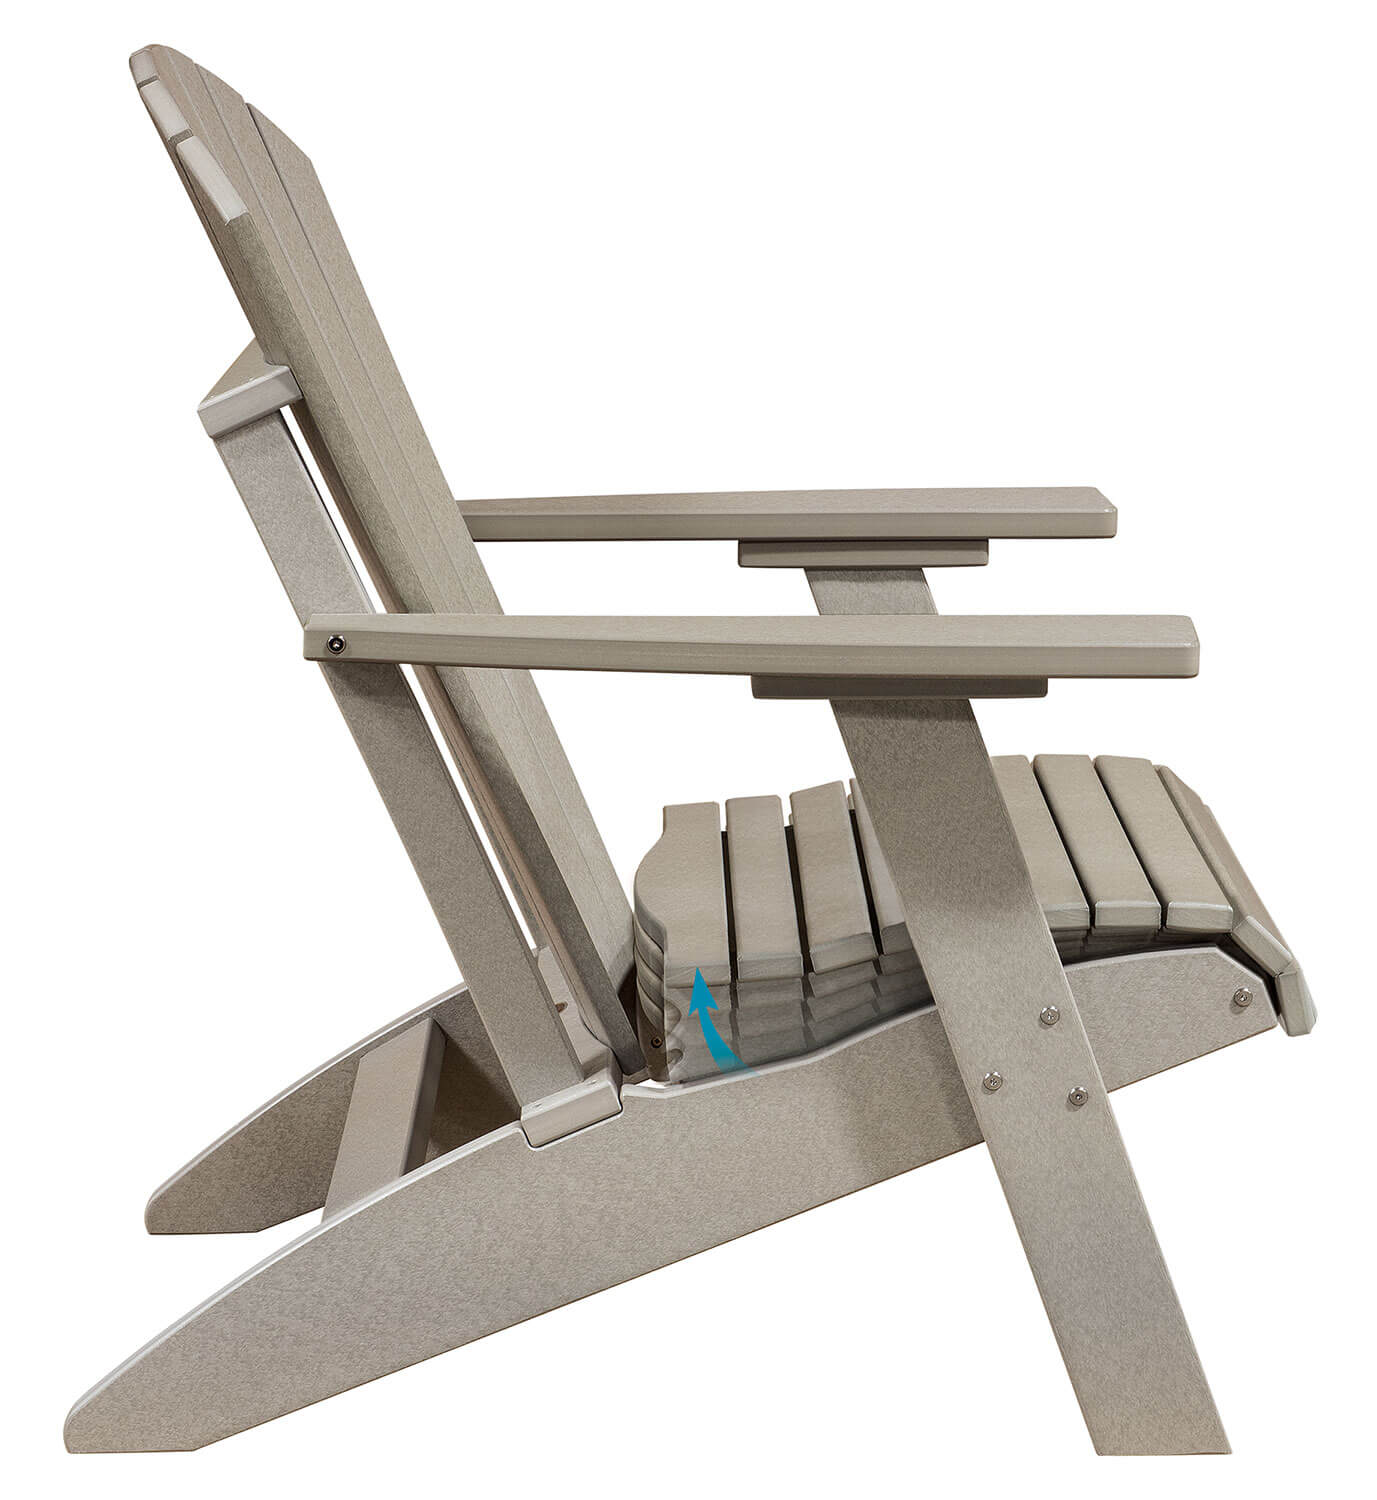 EC Woods Lift-N-Set Adirondack Outdoor Poly Chair Shown in Light Gray